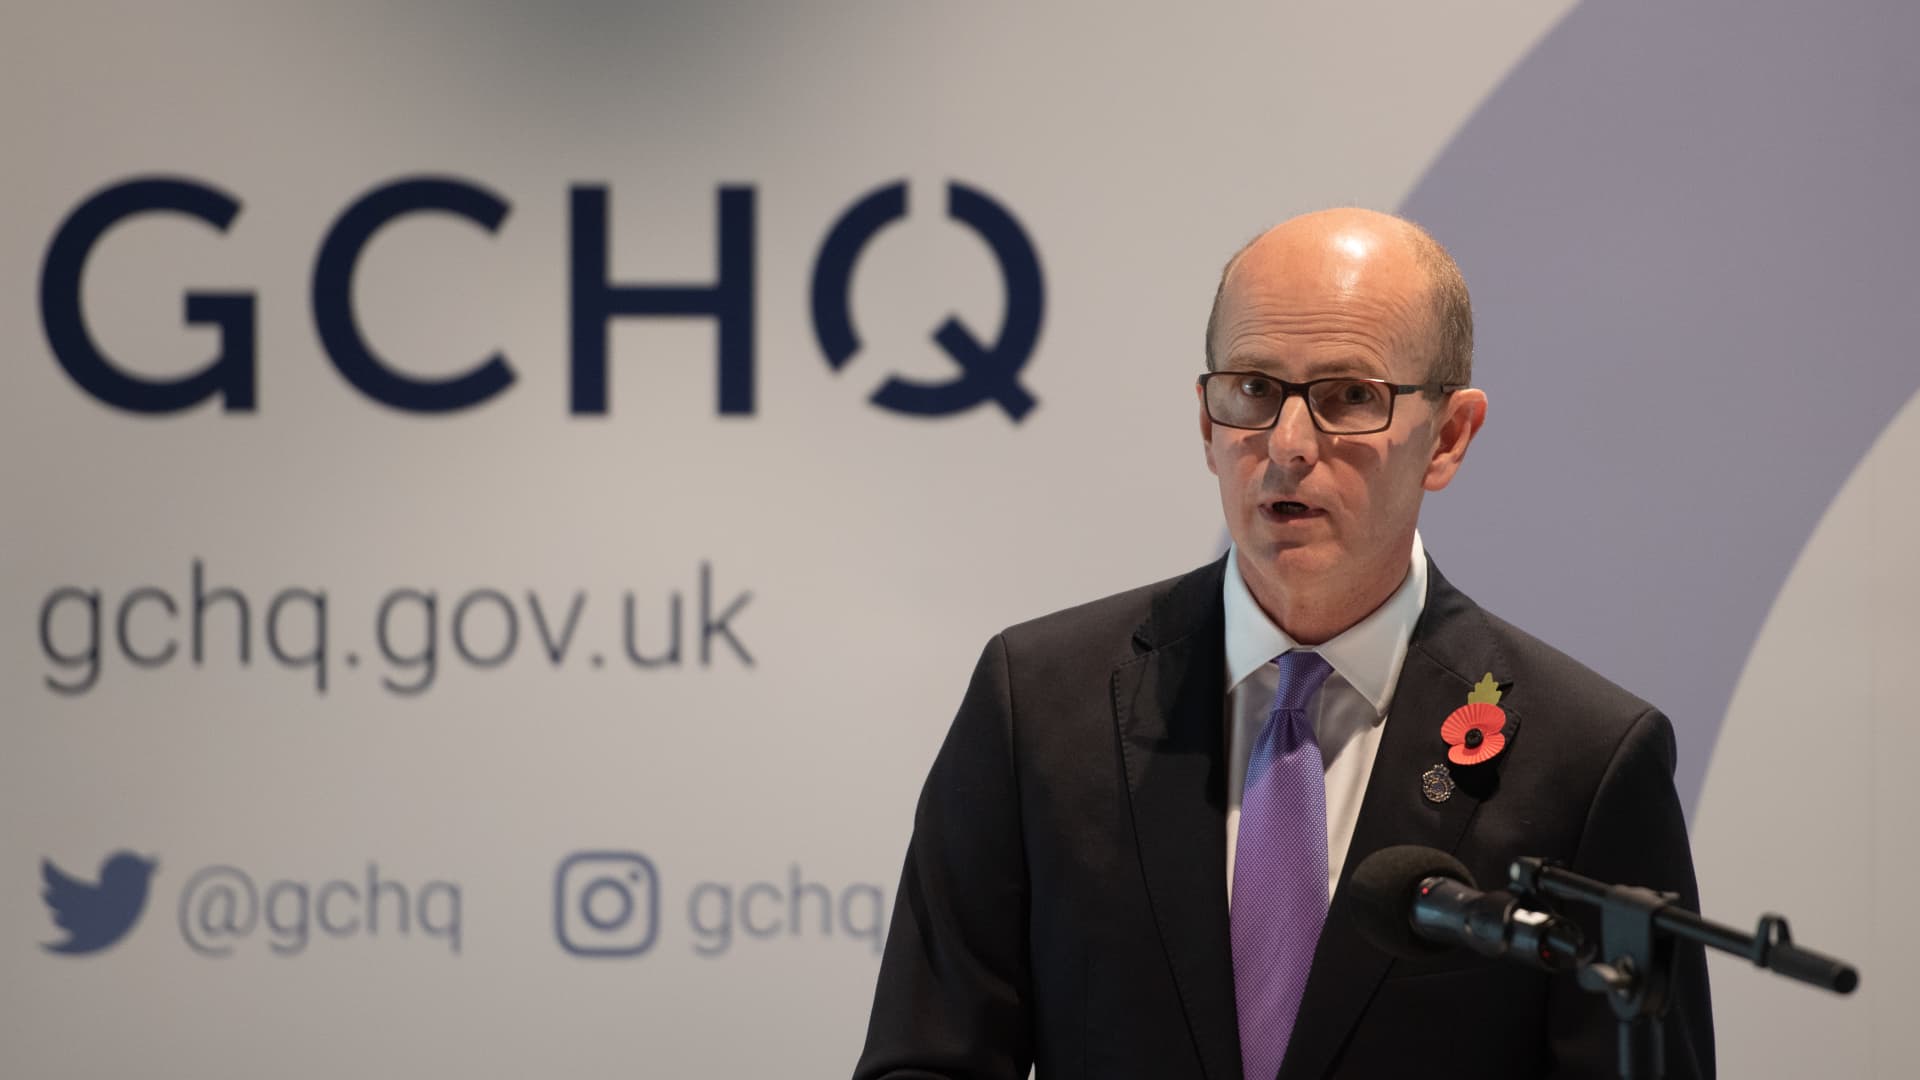 Jeremy Fleming, director of U.K. intelligence agency GCHQ, pictured in November 2019. Fleming delivered a speech in Canberra, Australia on Thursday in which he addressed the war in Ukraine.